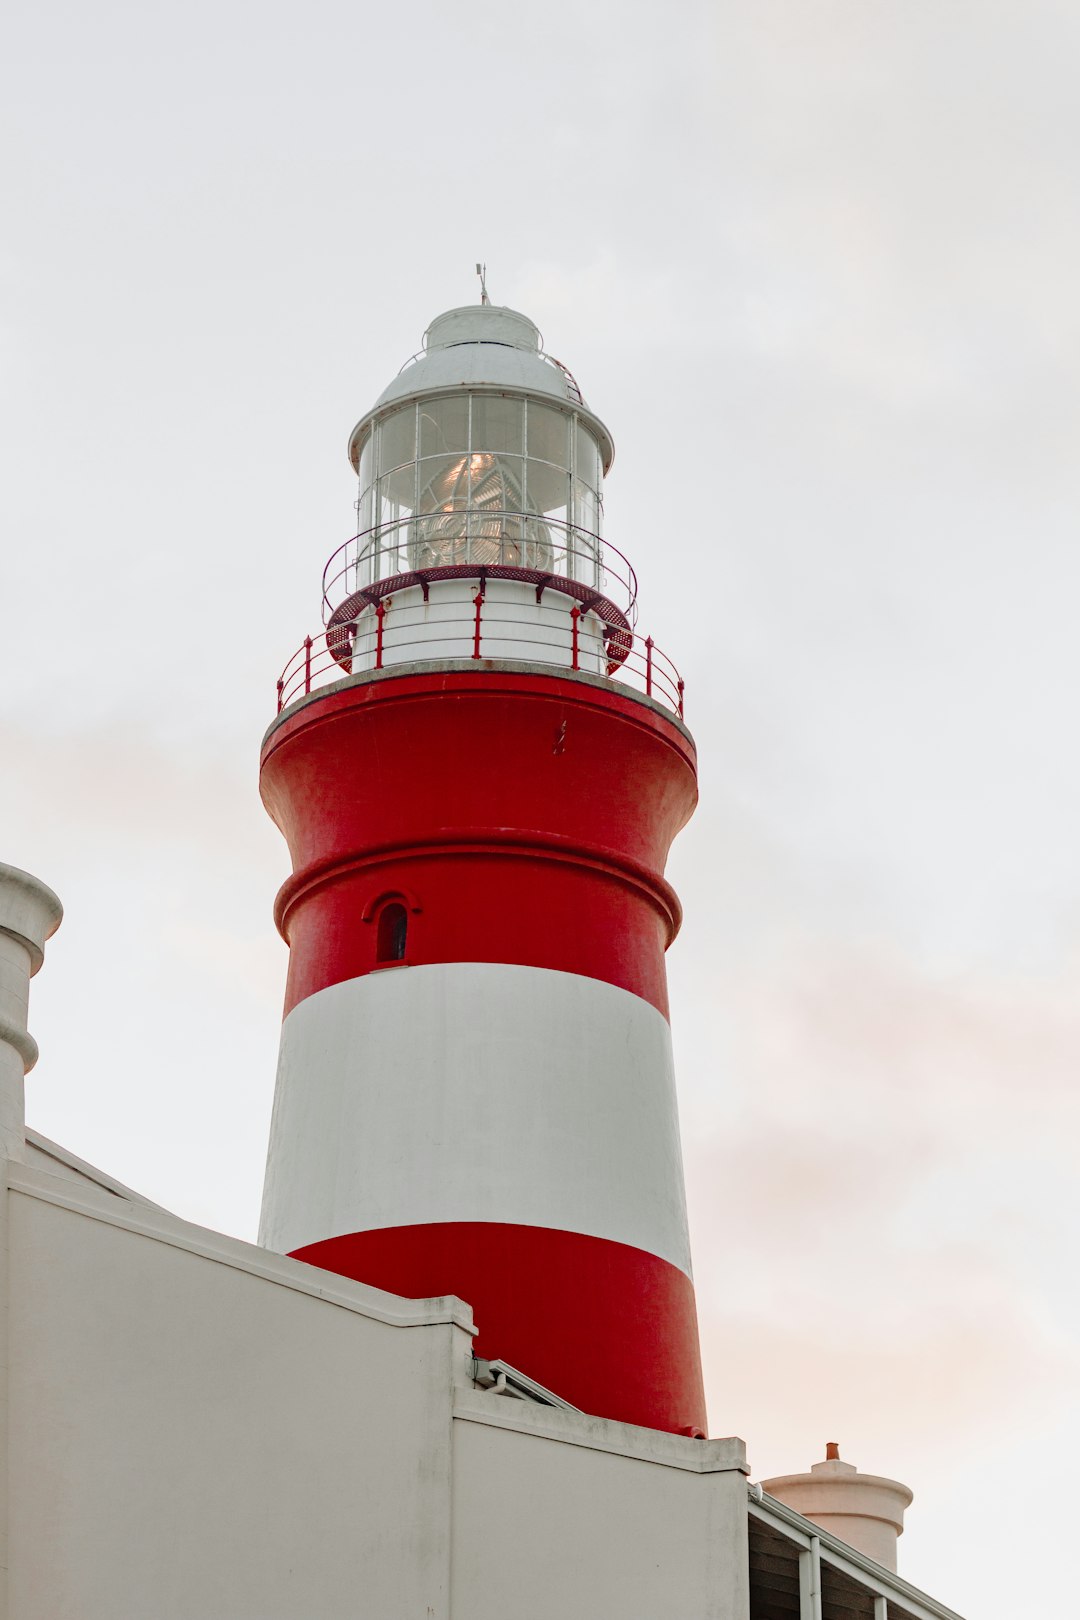 travelers stories about Lighthouse in L'Agulhas, South Africa